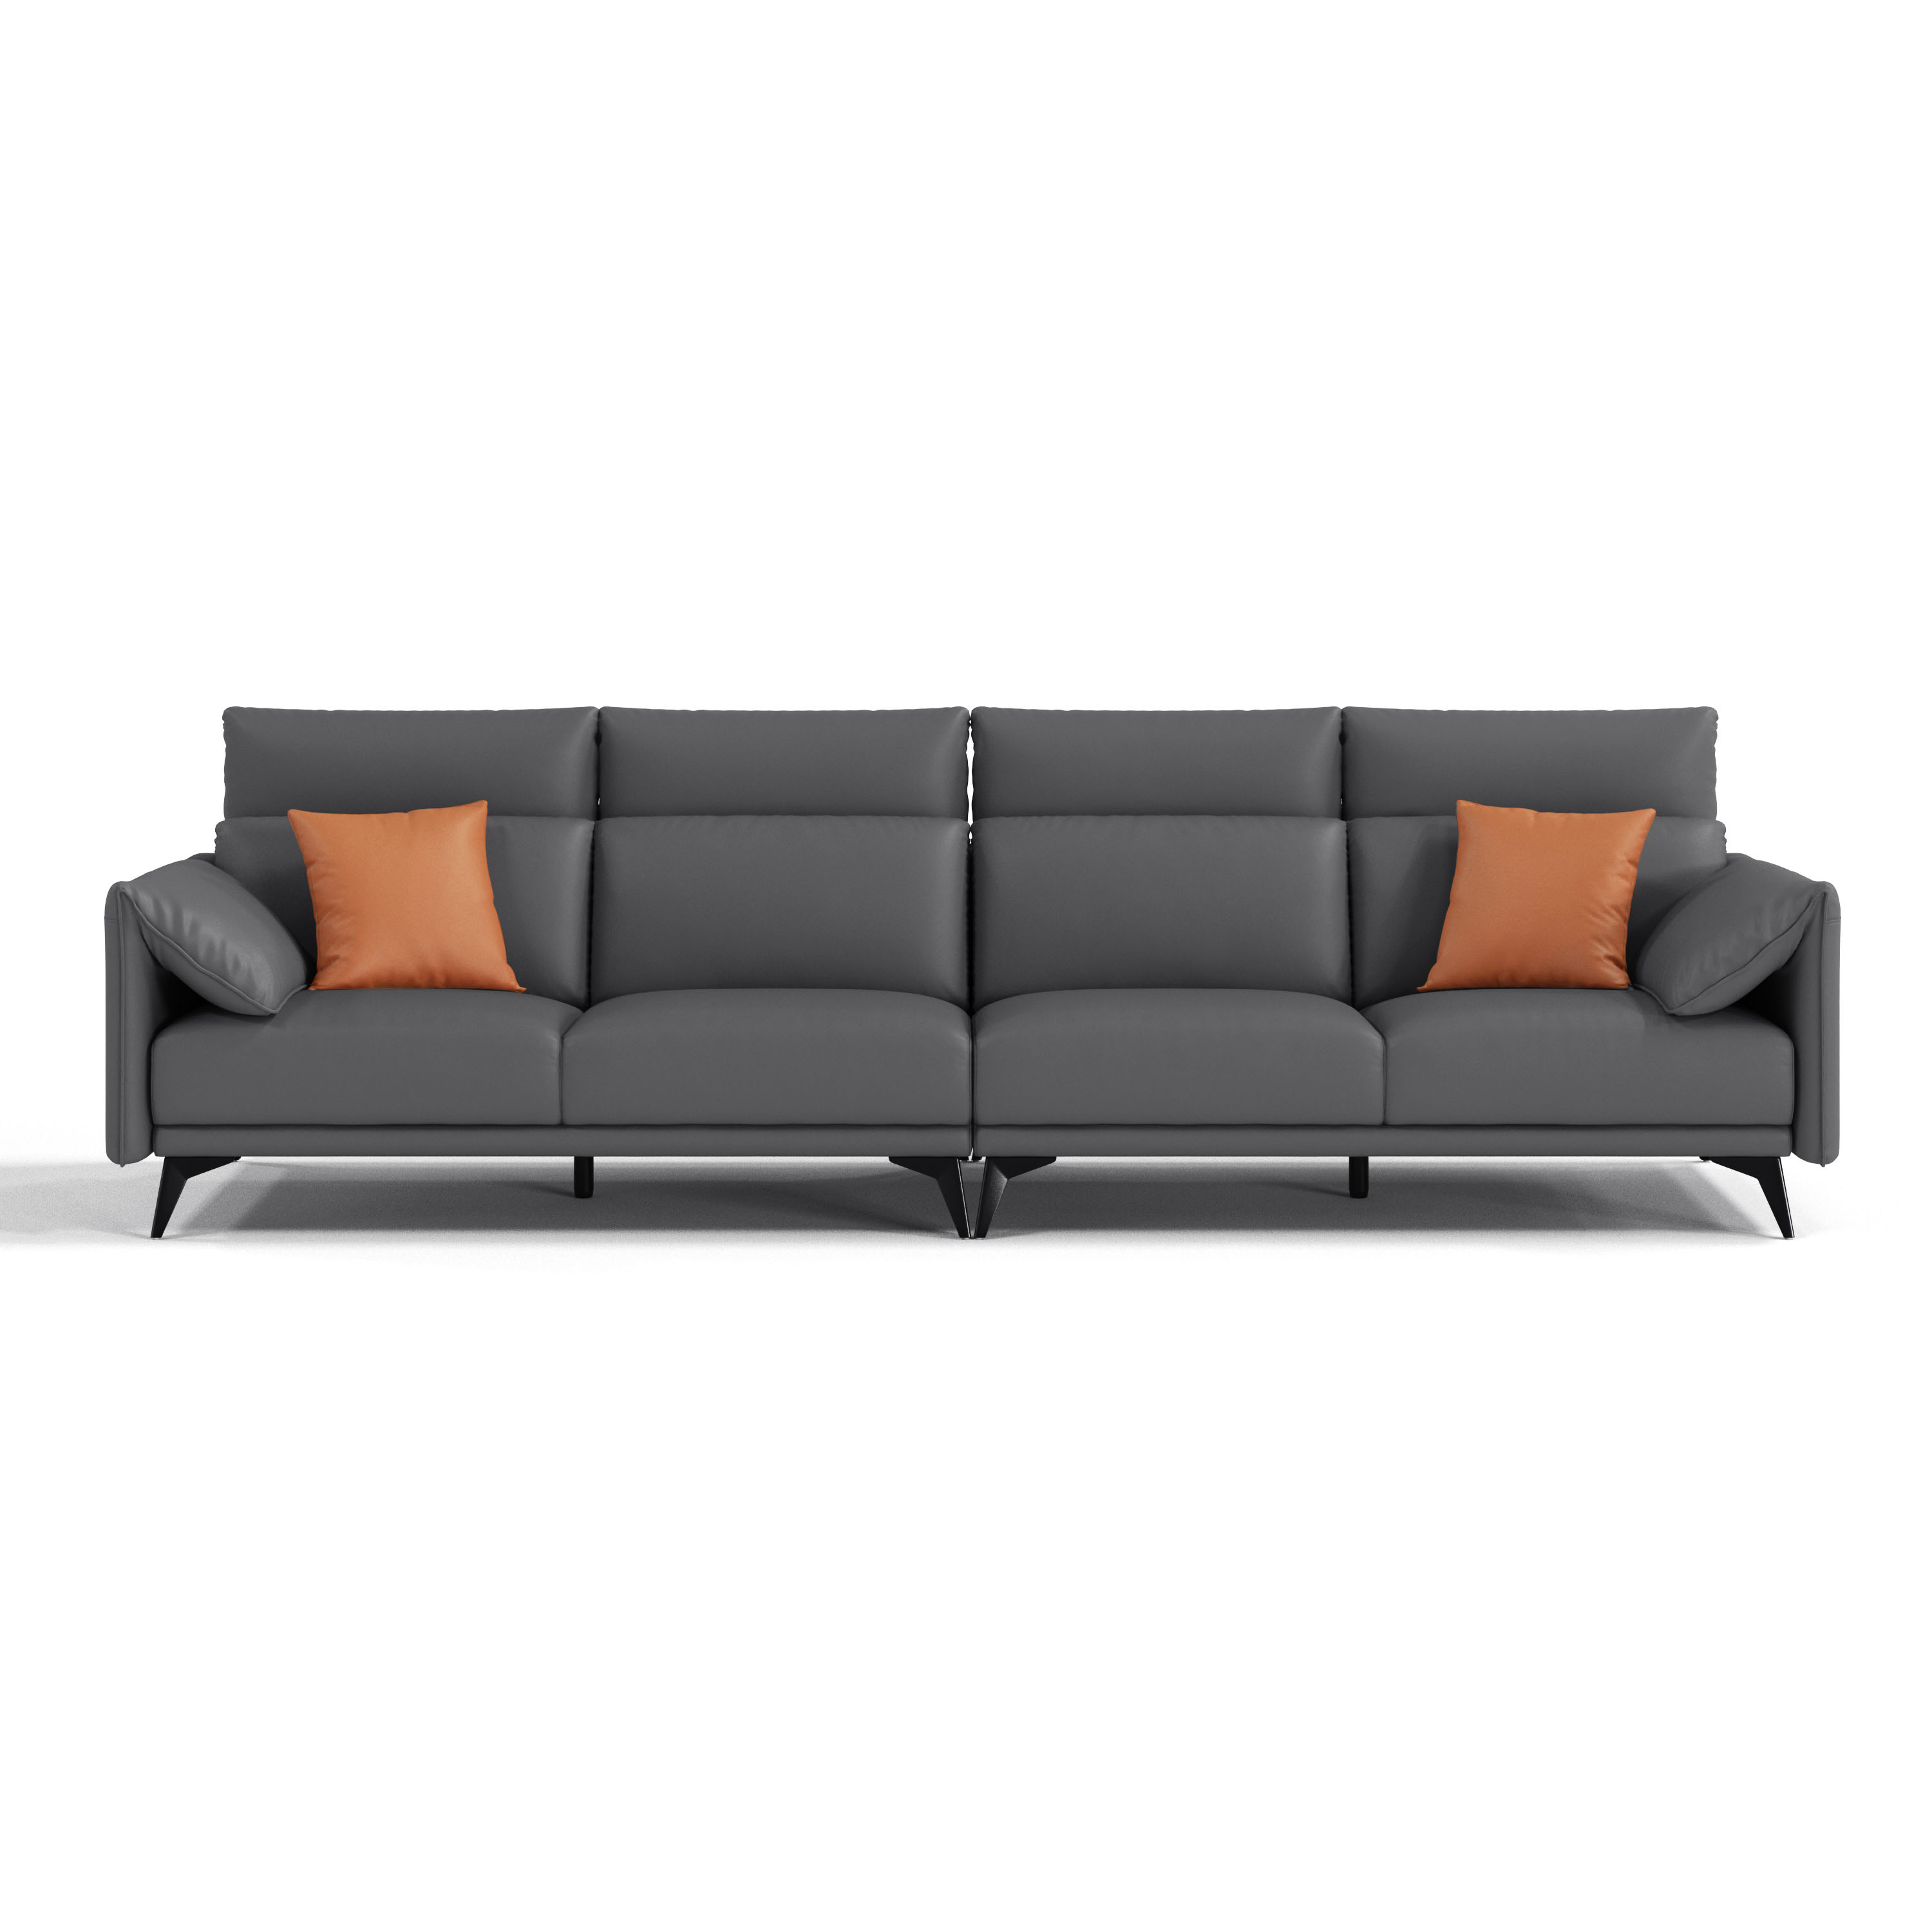 LINSY Venus Sectional Sofa 4-Seater | Vegan Leather | Cat Friendly Sectional